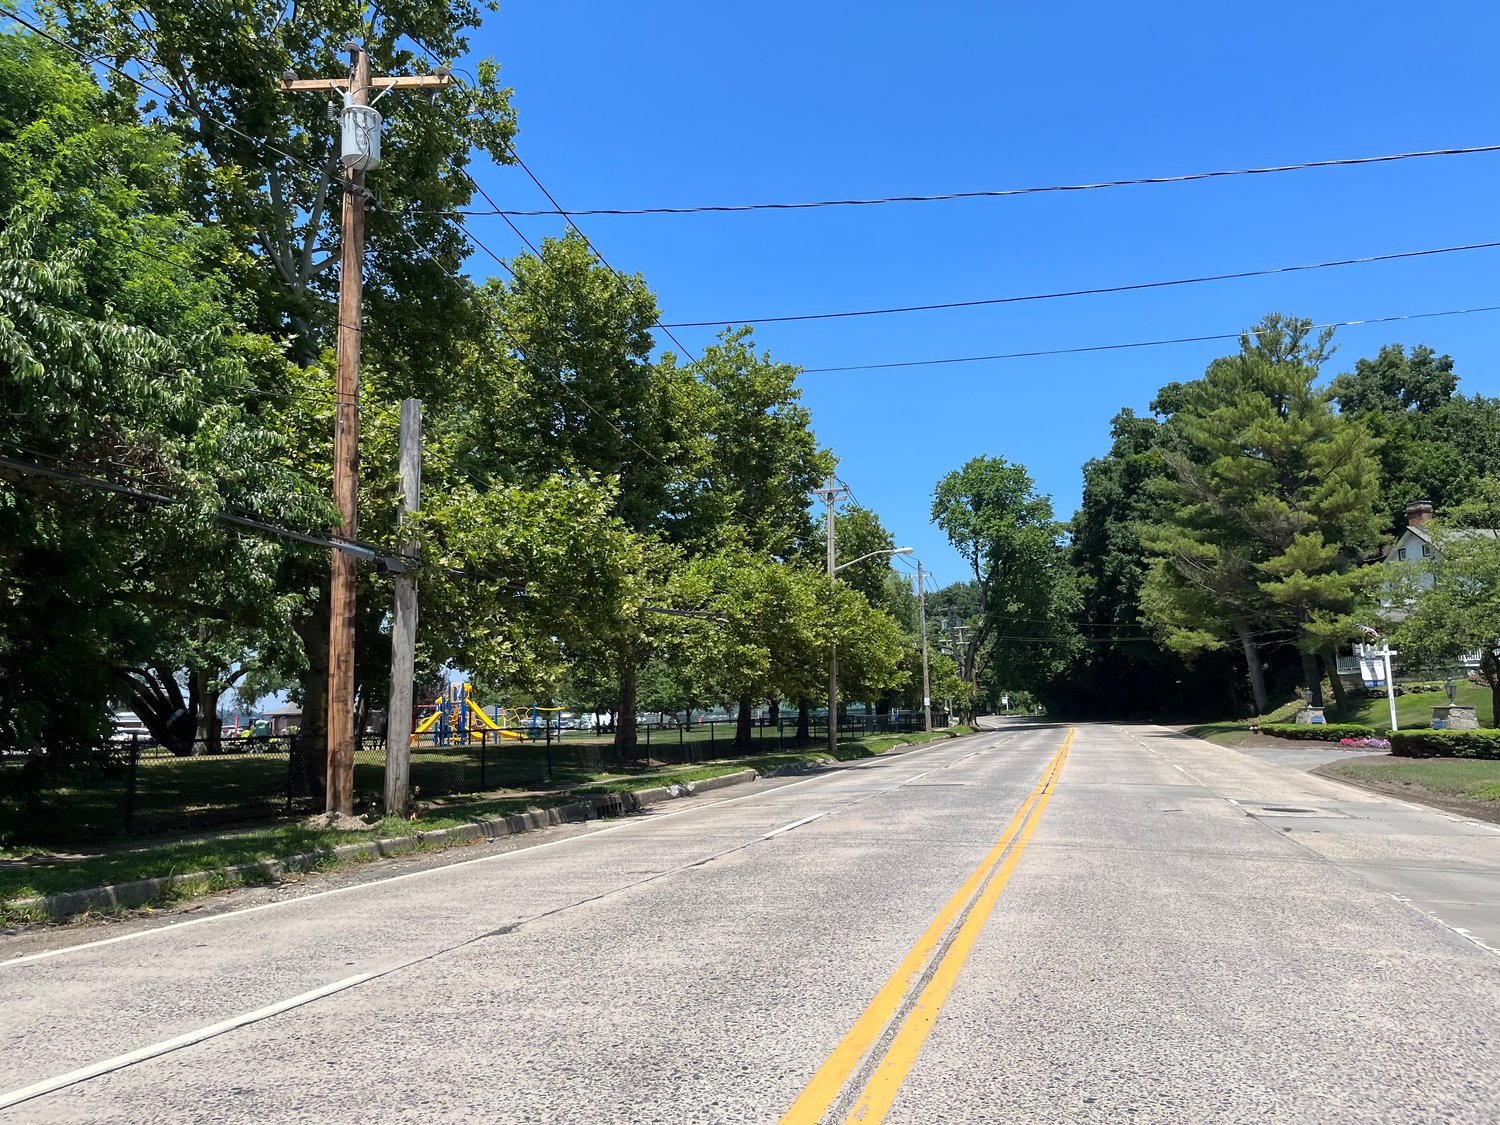 Upgrades to Shore Road will also include improvements to the drainage system, because the road is close to the water and floods frequently during foul weather.